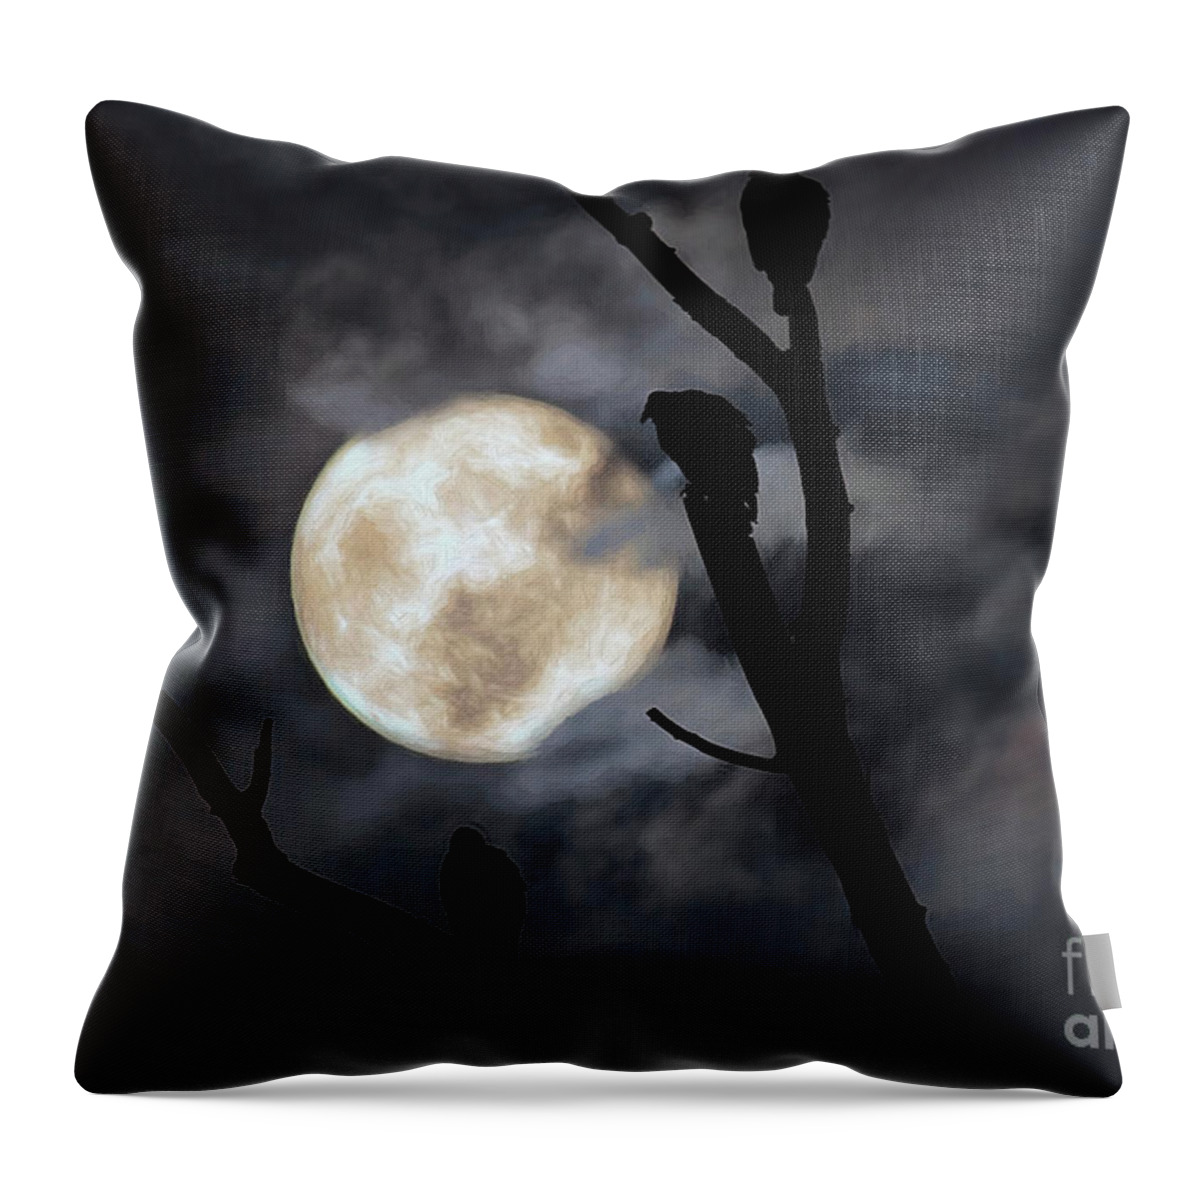 Venue Throw Pillow featuring the photograph Full Moon Committee by Darren Fisher